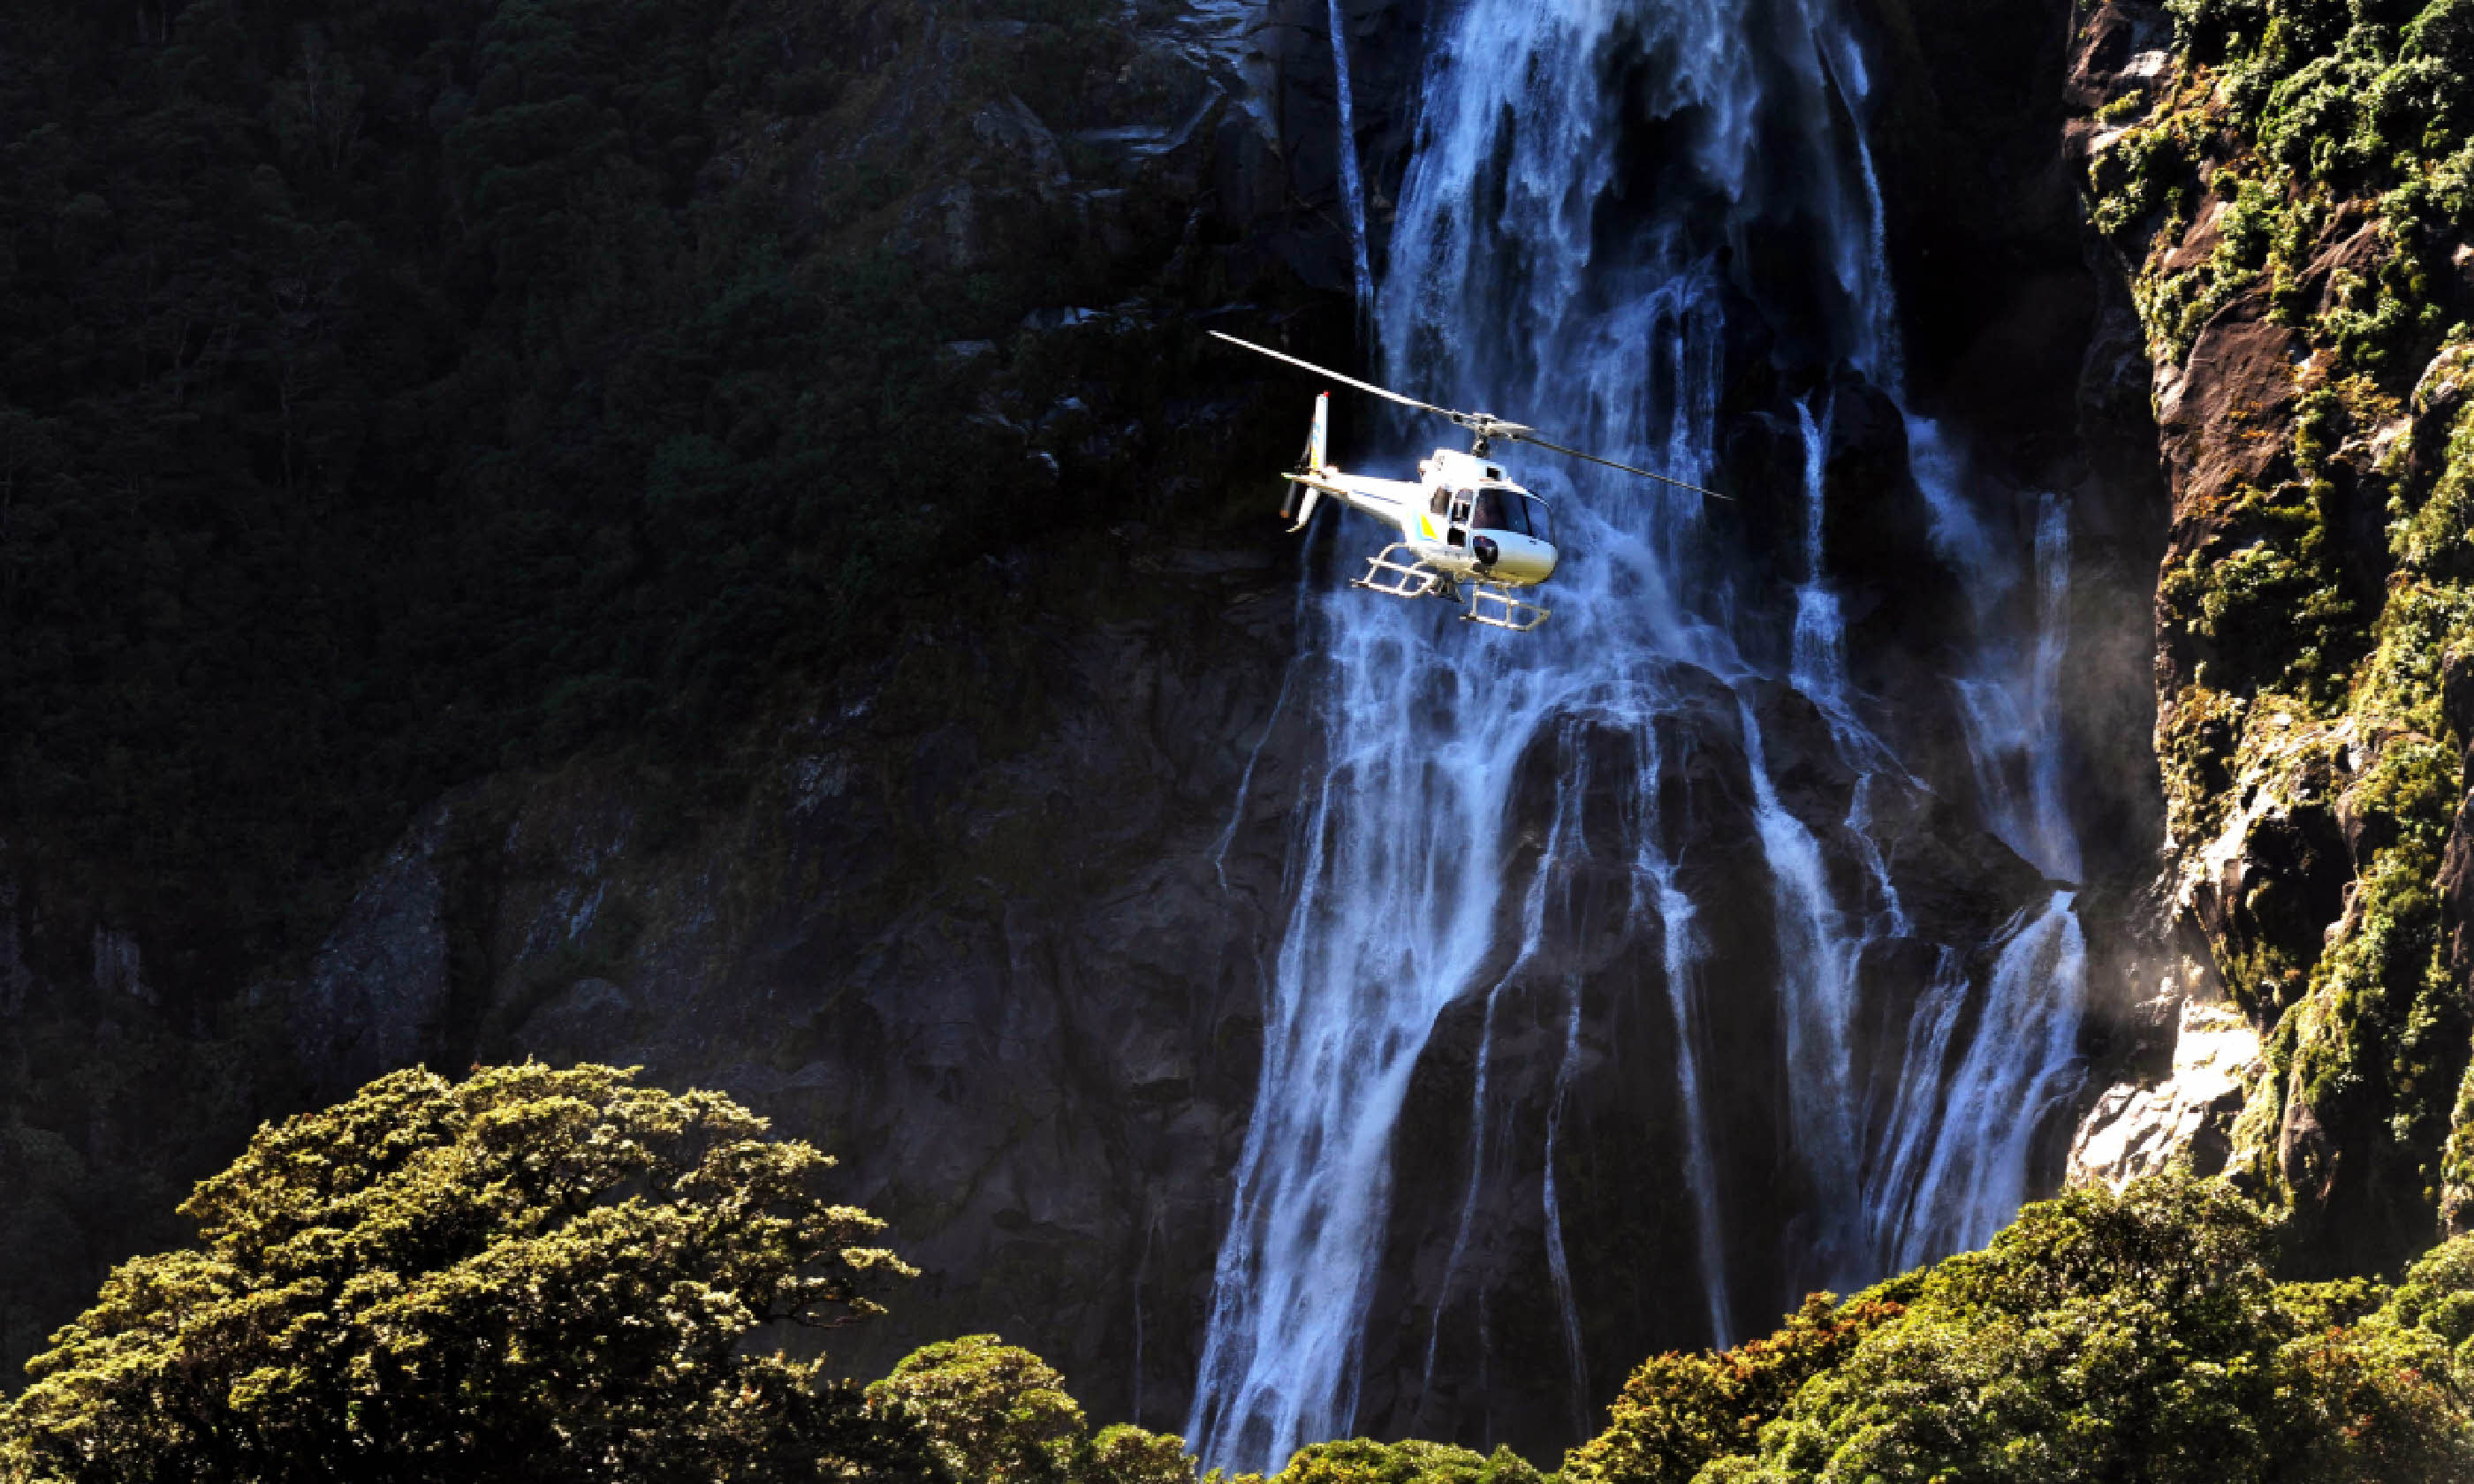 A helicopter flies over Fiordland, southern New Zealand (Shutterstock)